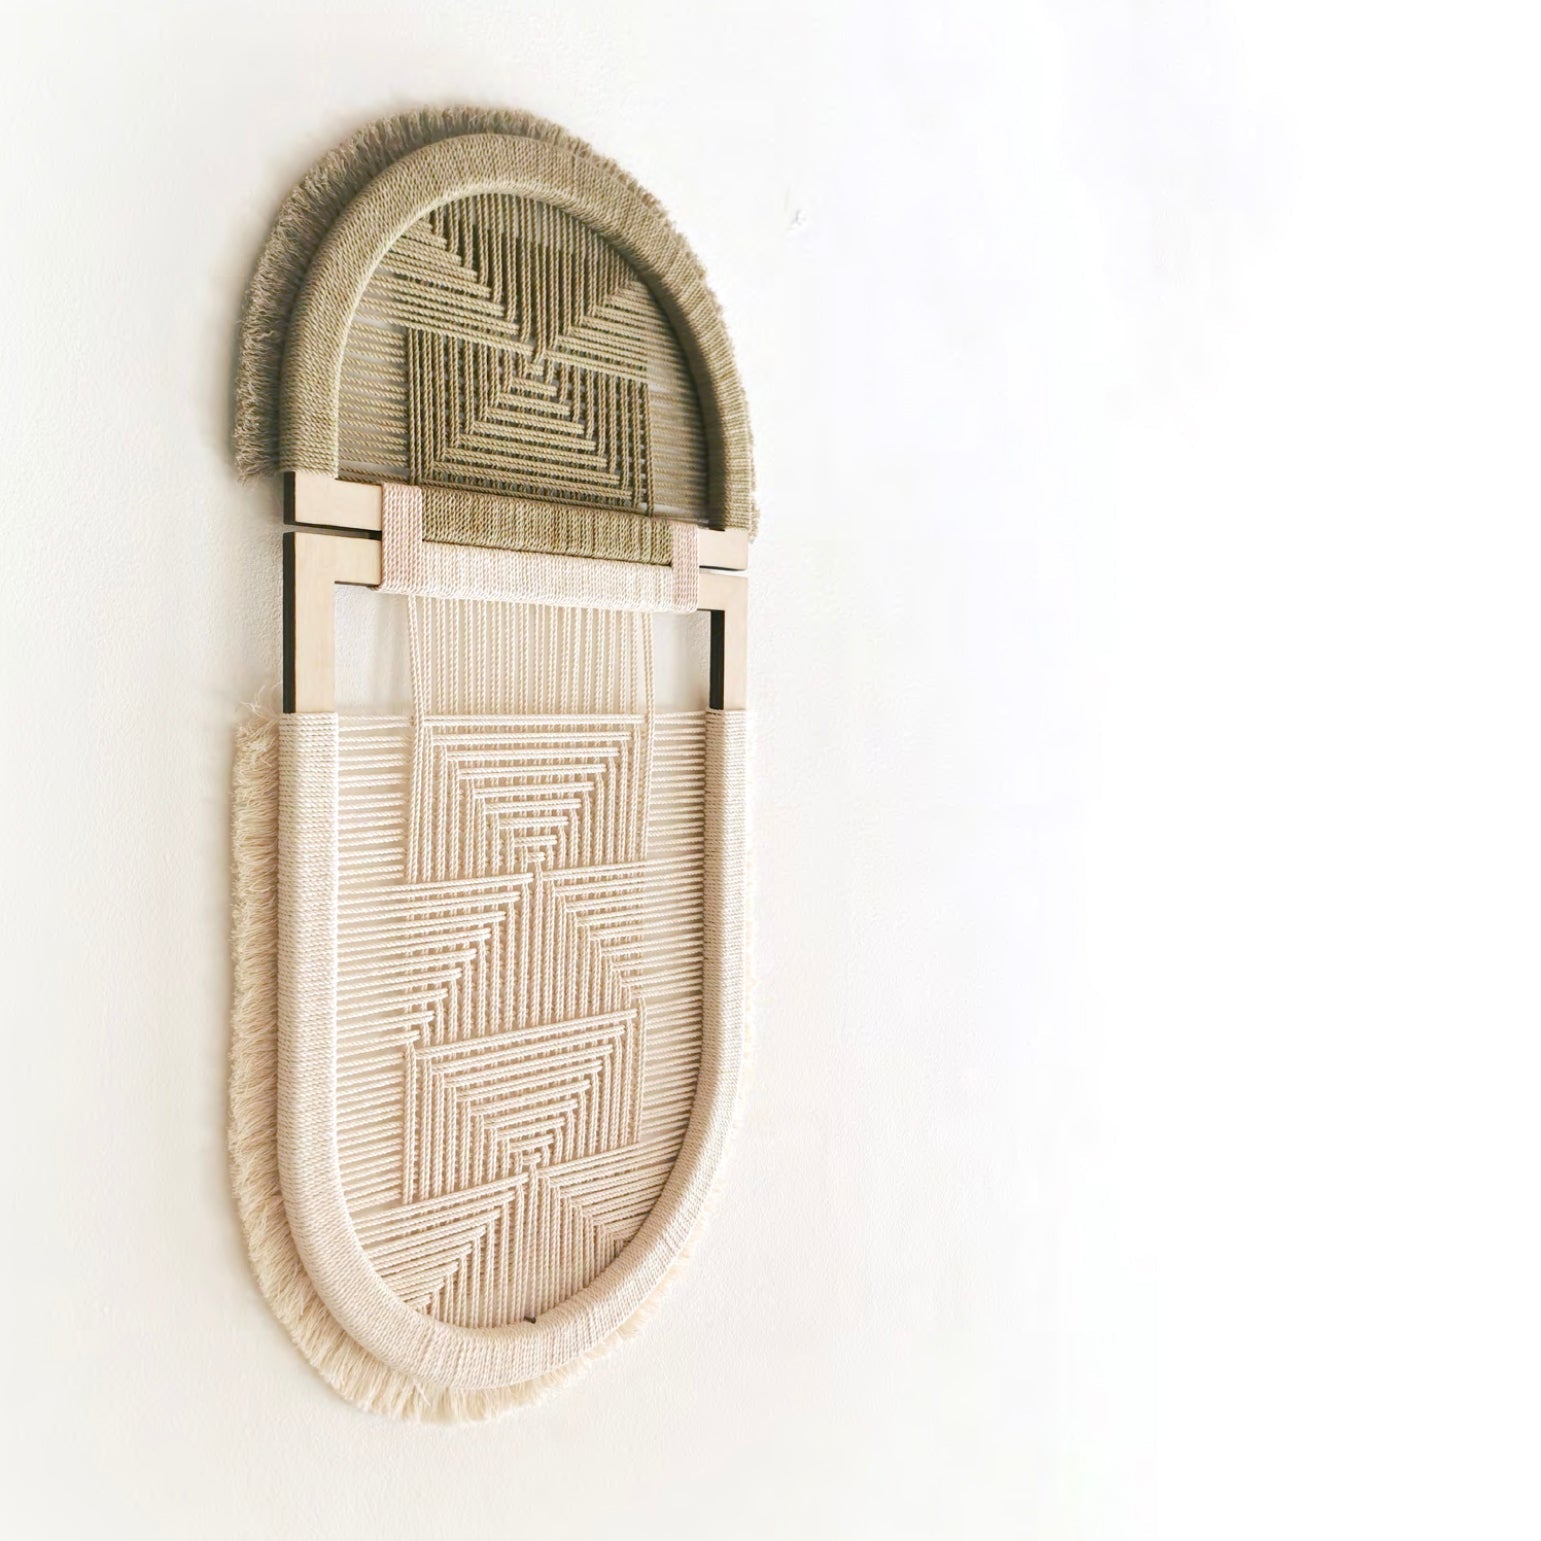 Combine Series Wallhanging - Natural/Olive Green by NOM - Toast and honey studio